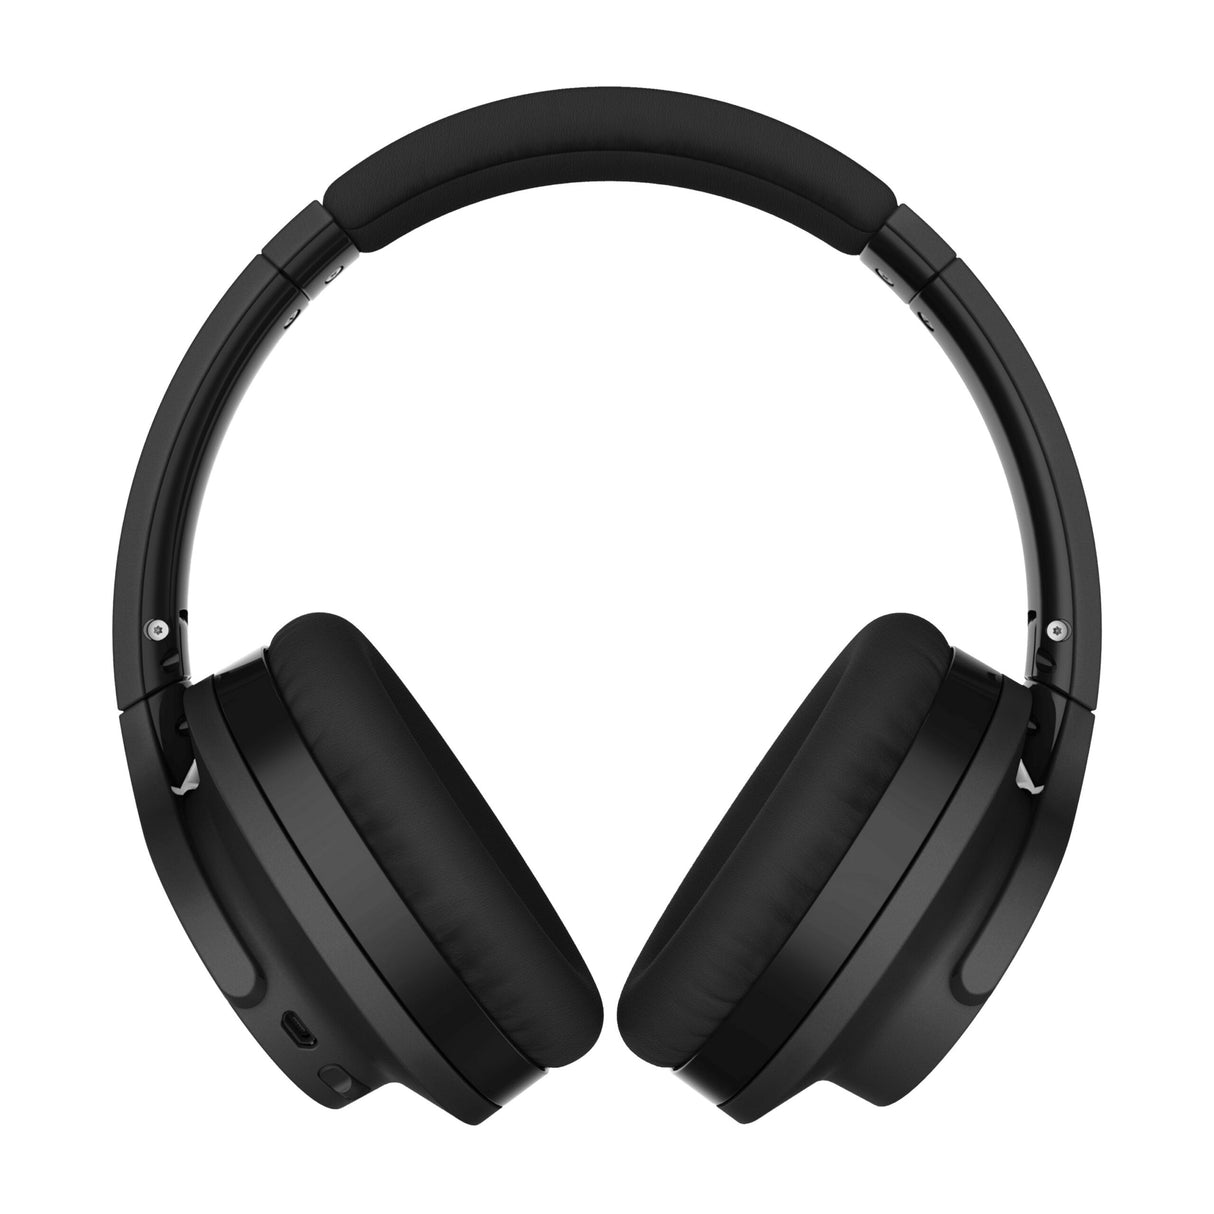 Audio-Technica ATH-ANC700BTBK Quietpoint Over-Ear Wireless Headphones with Active Noise Cancelling